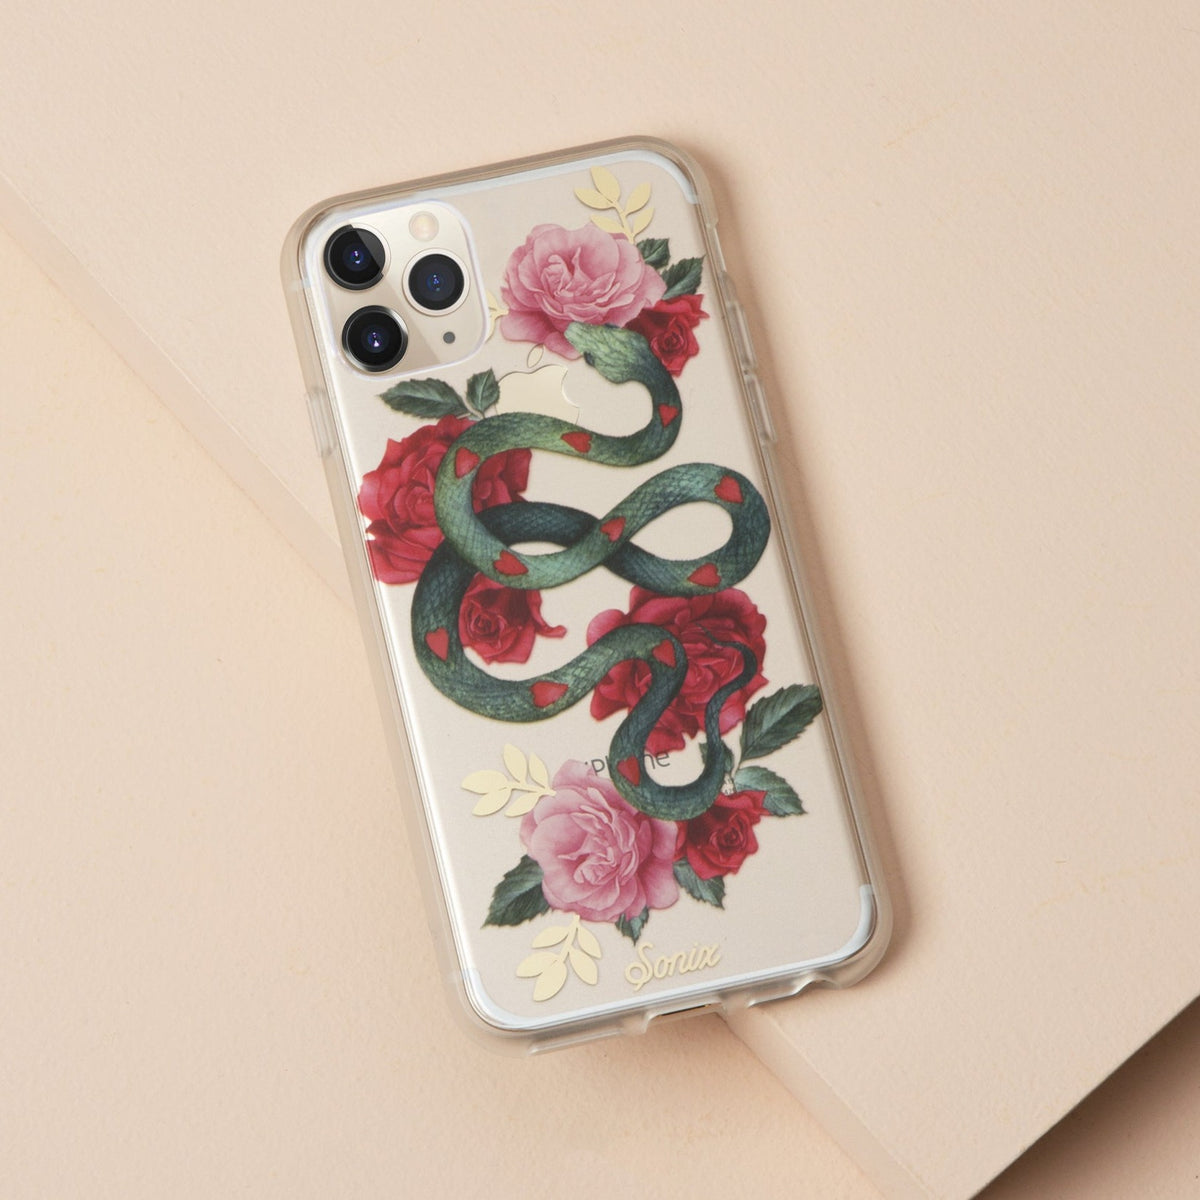 Gucci Snake iPhone 12 Pro Max Impact Case